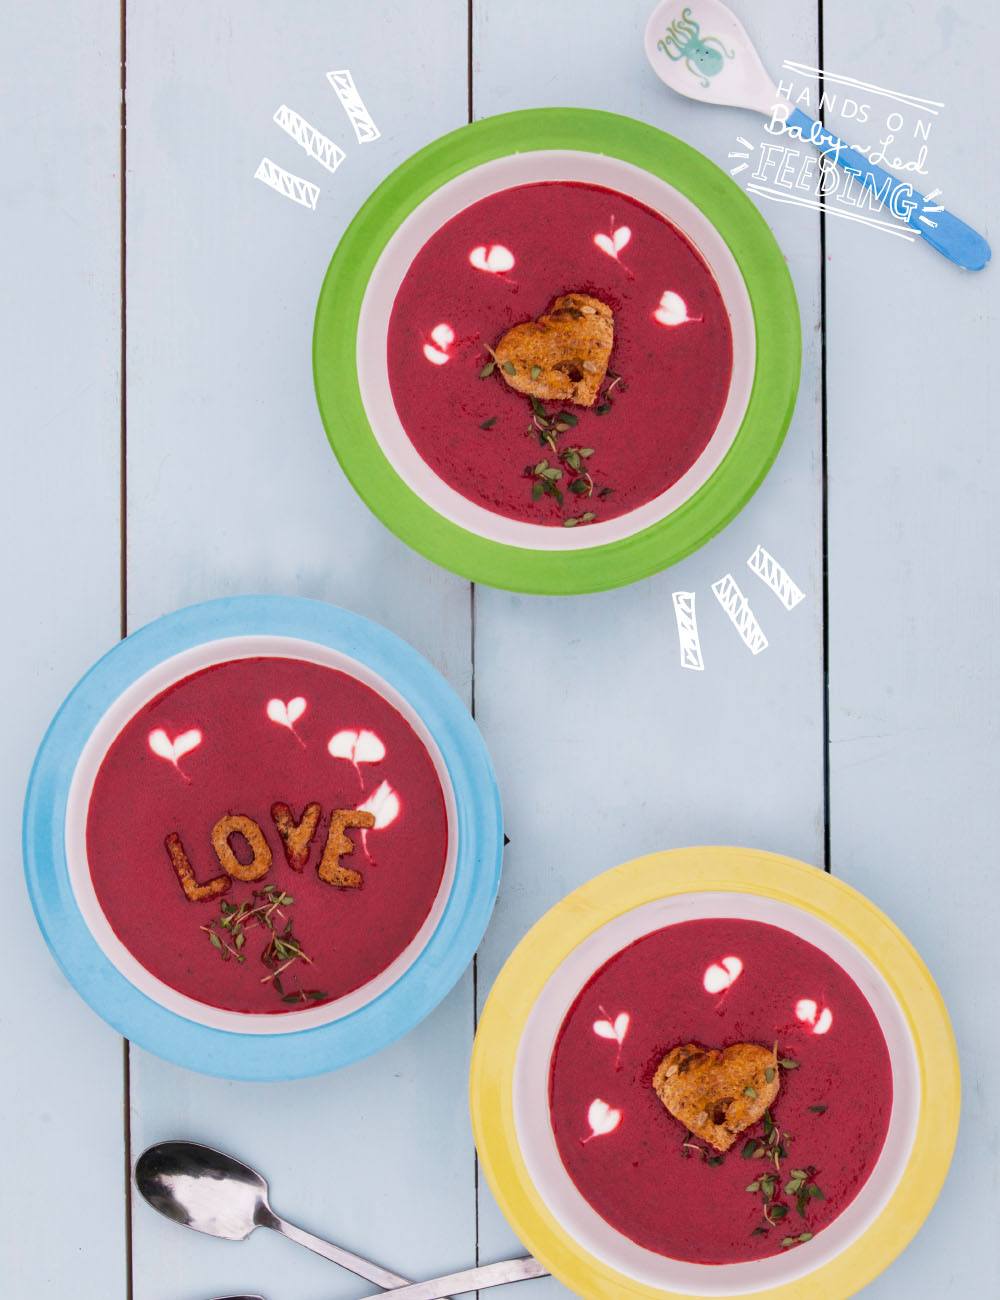 Baby-Led-Feeding-All-you-Need-is-Love-and-this-Beetroot-Soup-Bowls